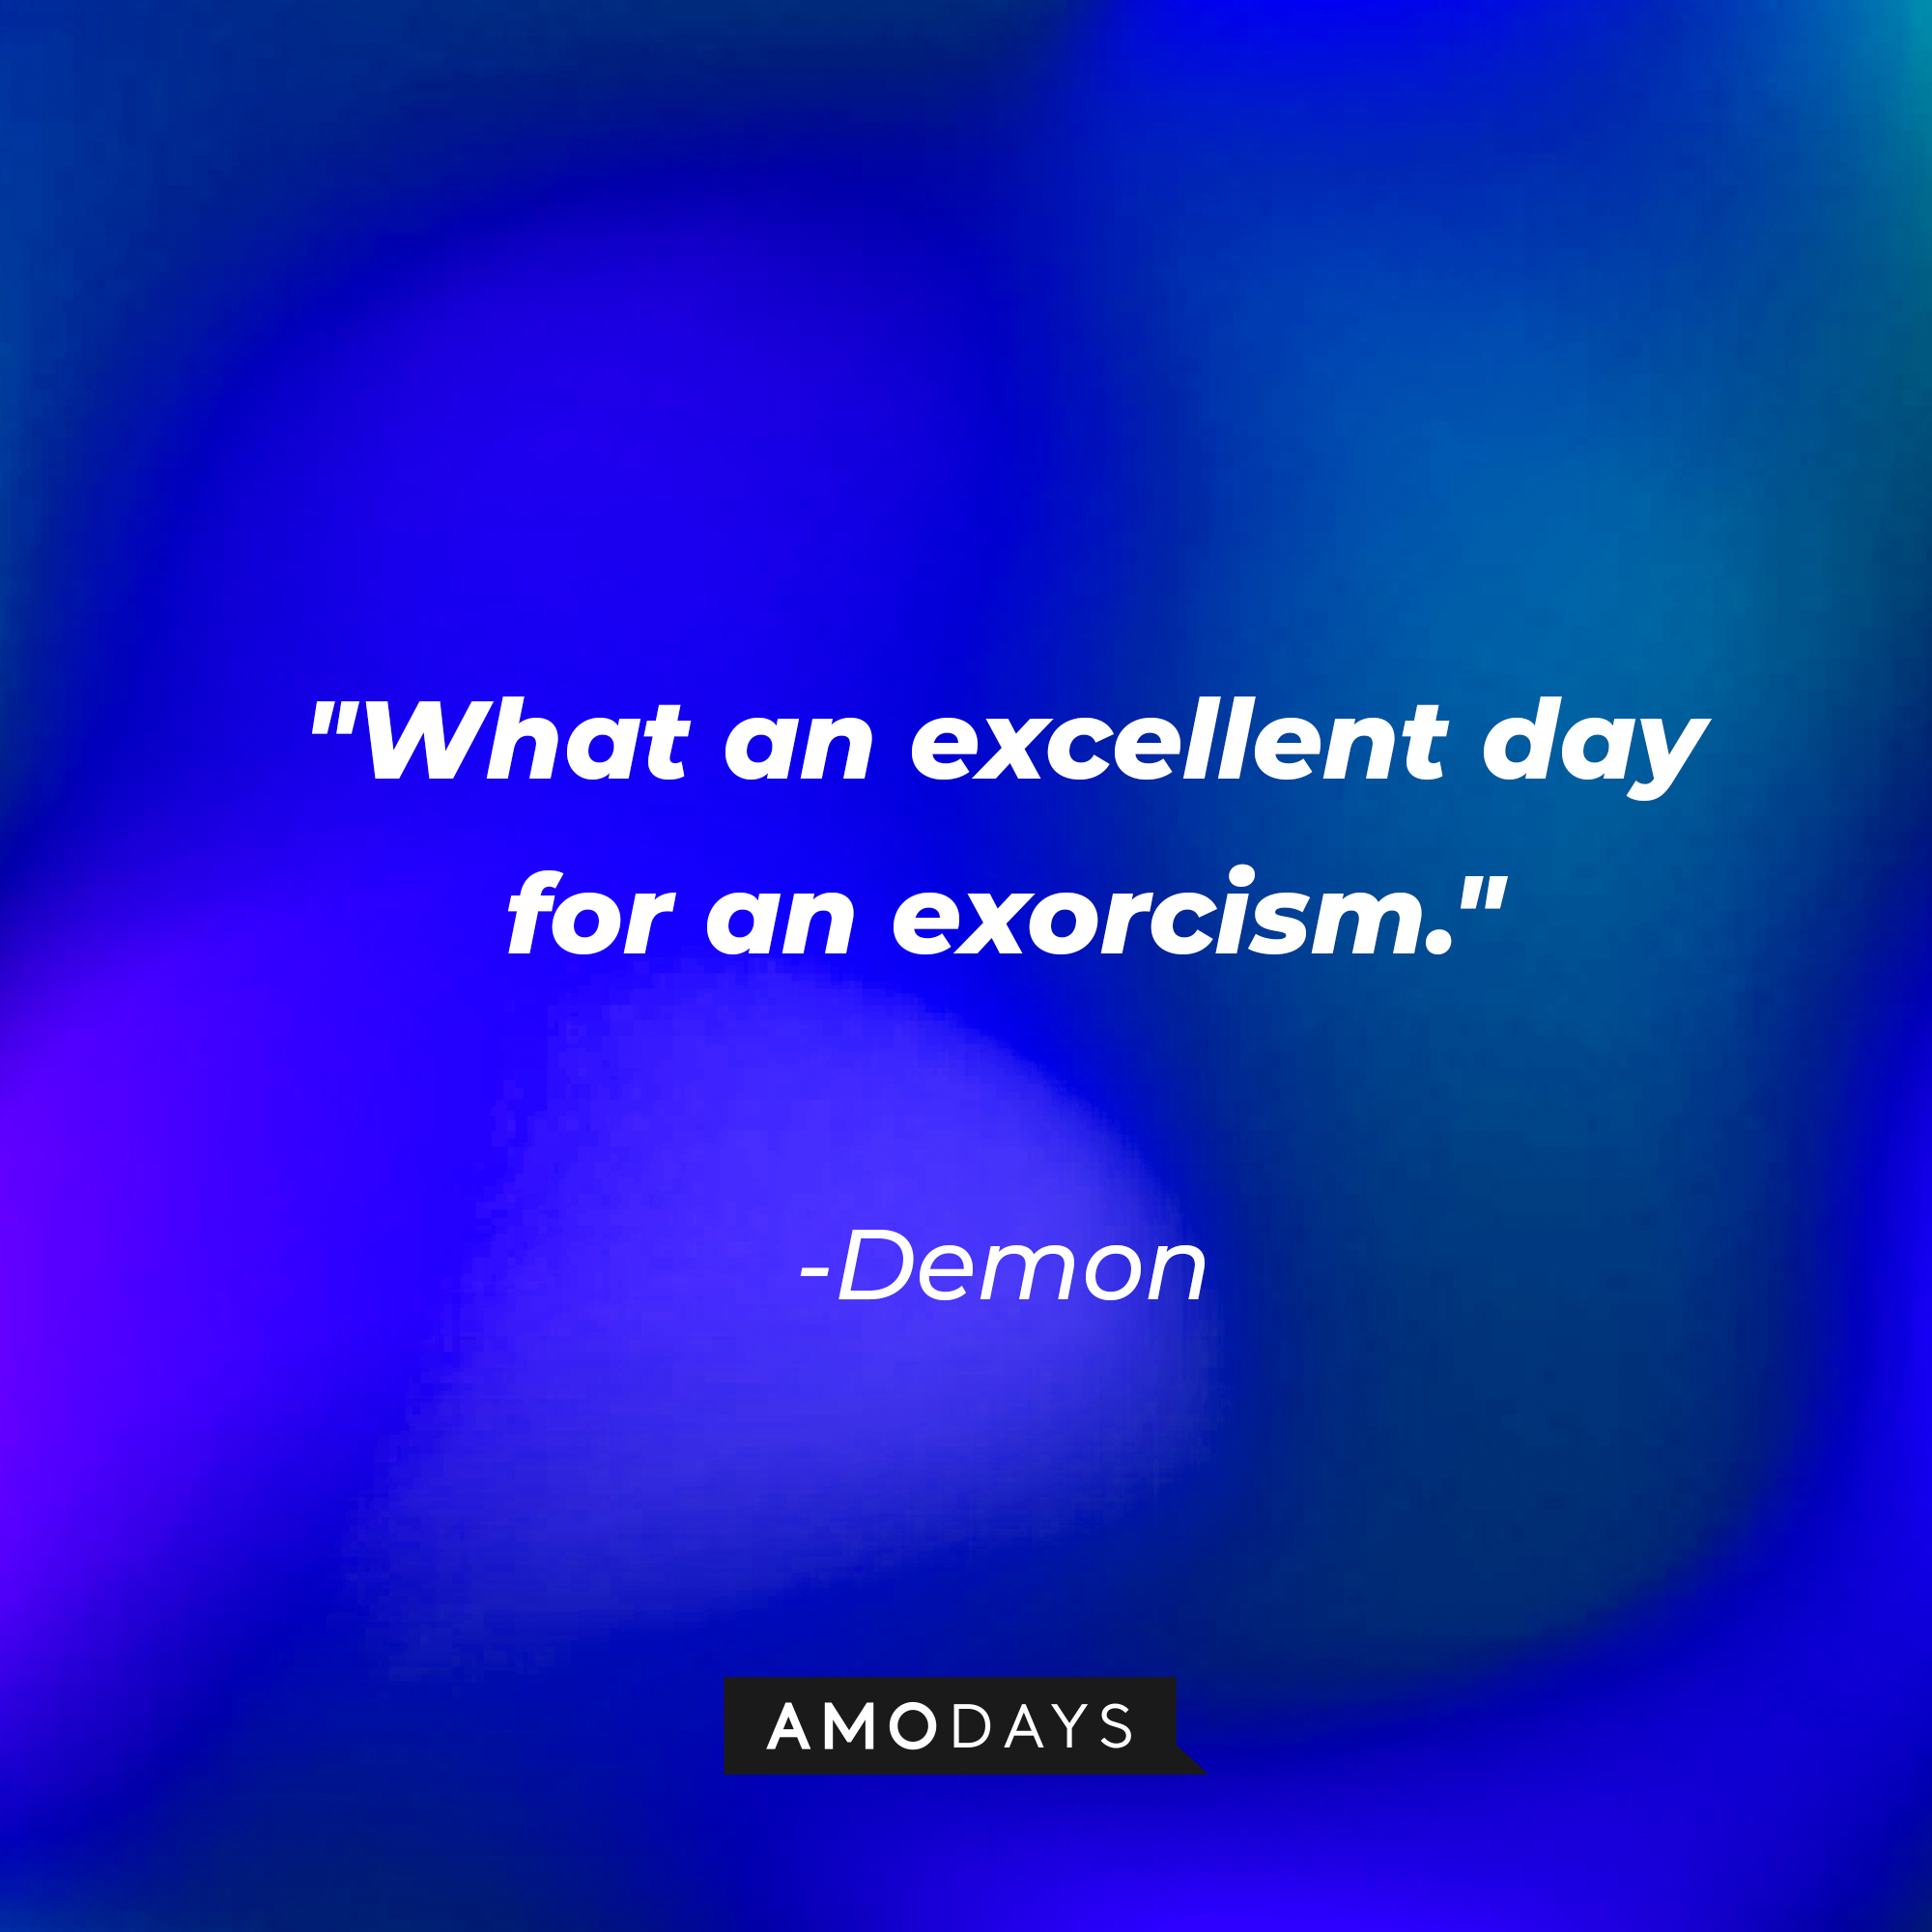 Demon's quote: "What an excellent day for an exorcism." | Source: AmoDays